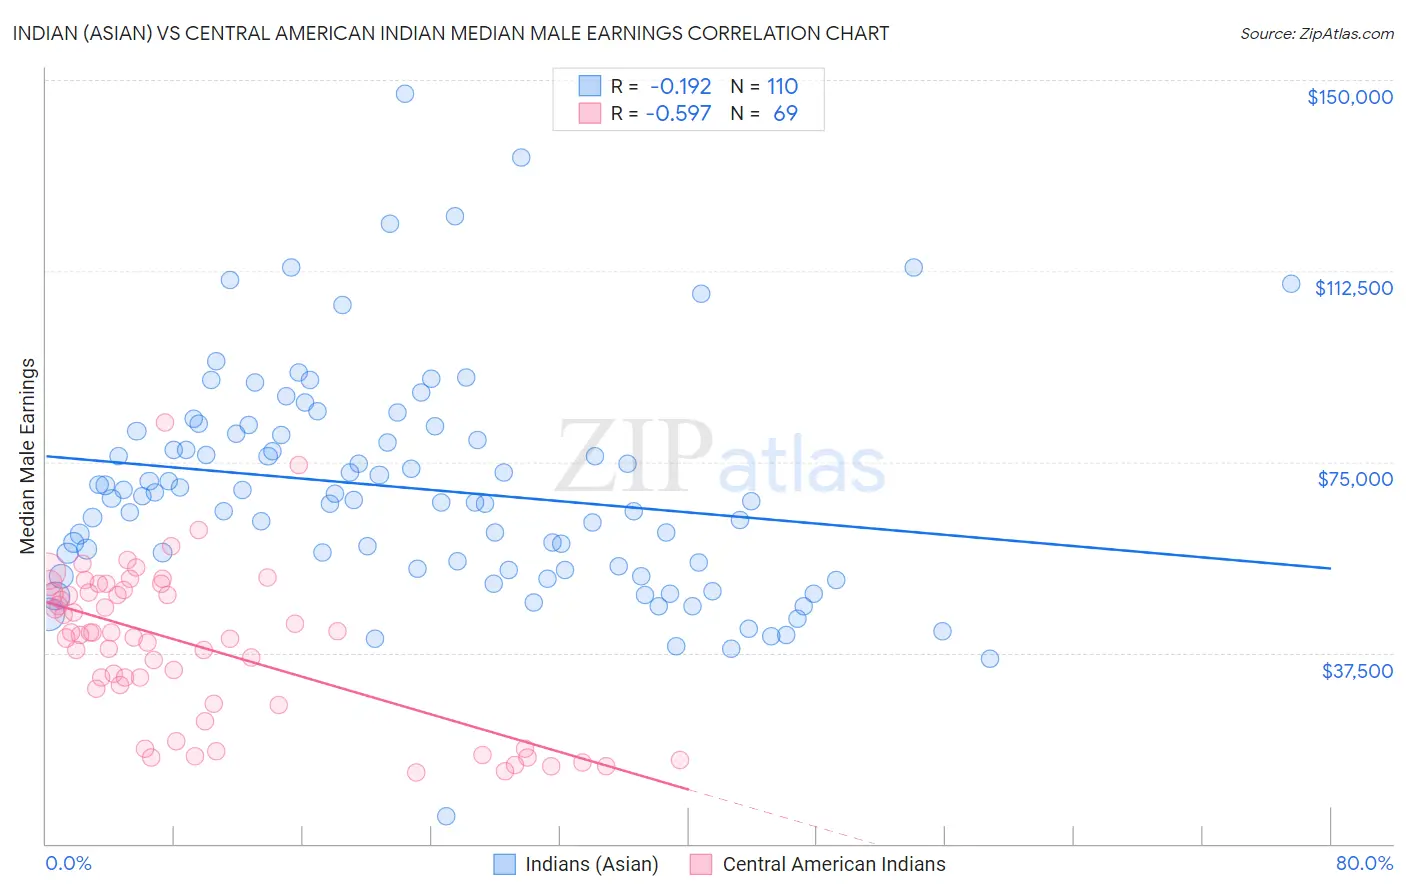 Indian (Asian) vs Central American Indian Median Male Earnings